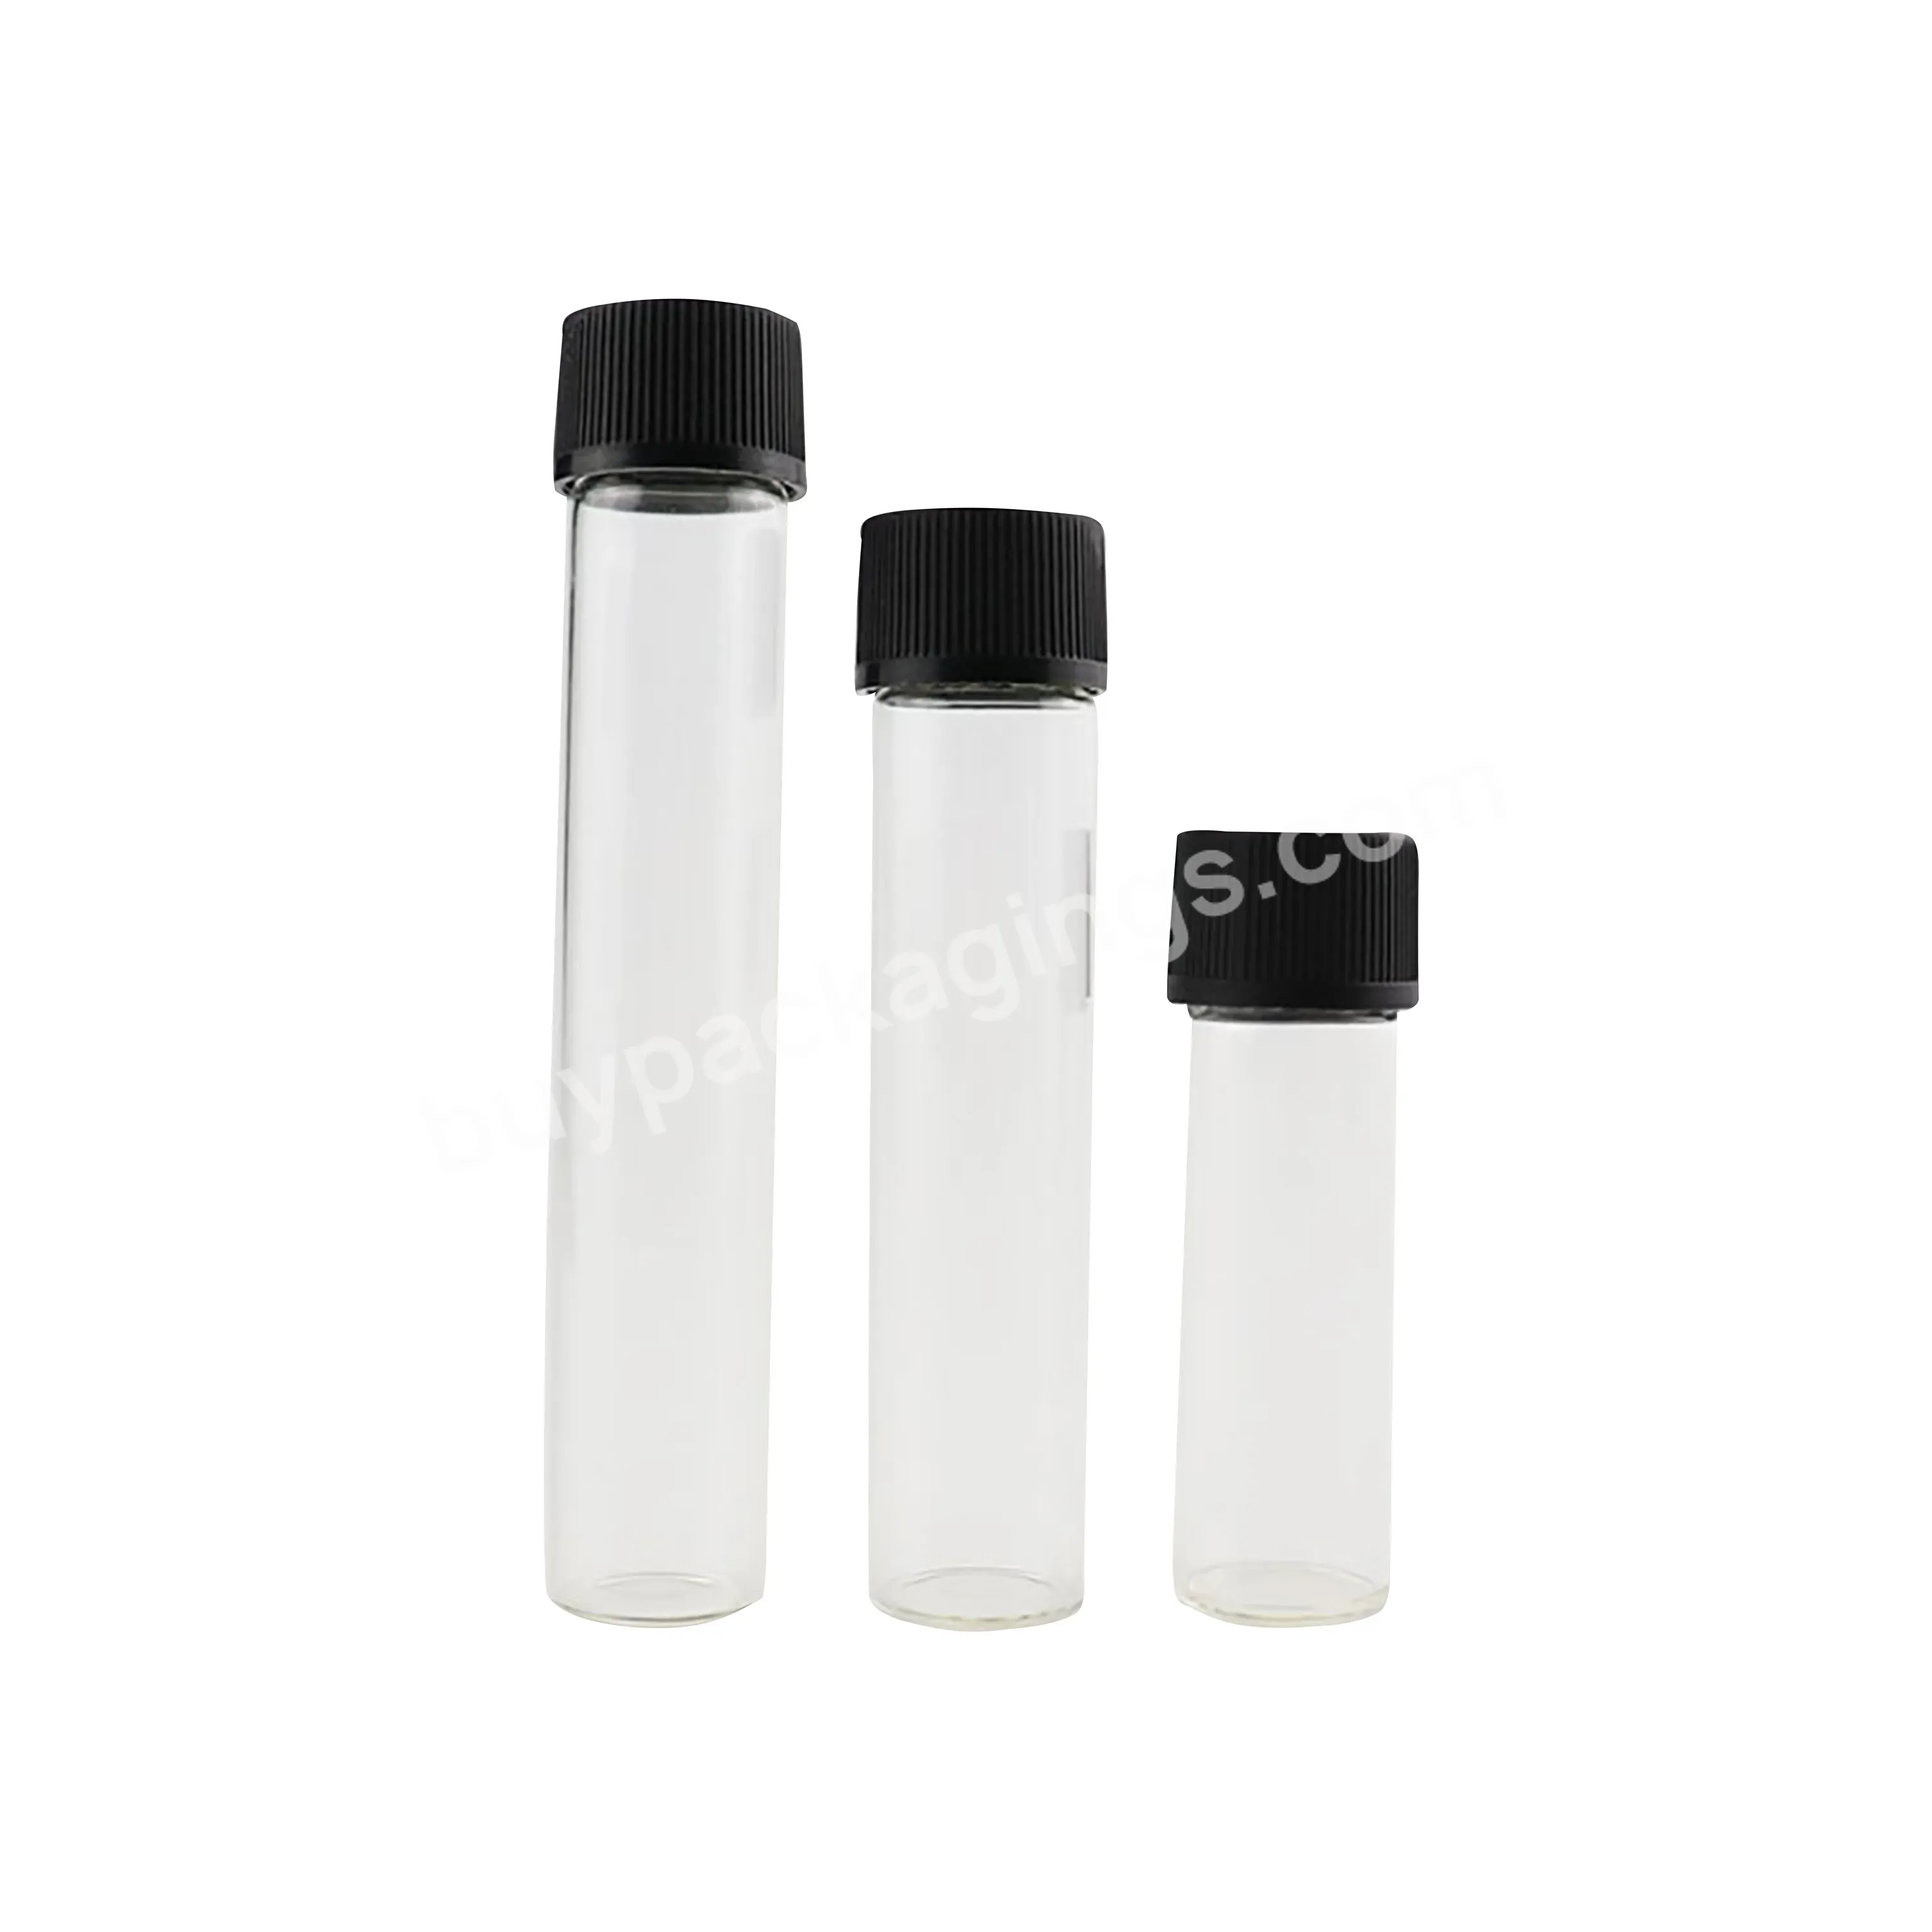 Wholesale Flat Bottom Herb Child Resistant Cap Glass Tube Pre Roll Smell Proof Glass Bottle With Child Proof Lid - Buy Wholesale Herb Flat Bottom Child Resistant Cap Glass Tube,Pre Roll Smell Proof Glass Bottle,Bottle With Child Proof Lid.